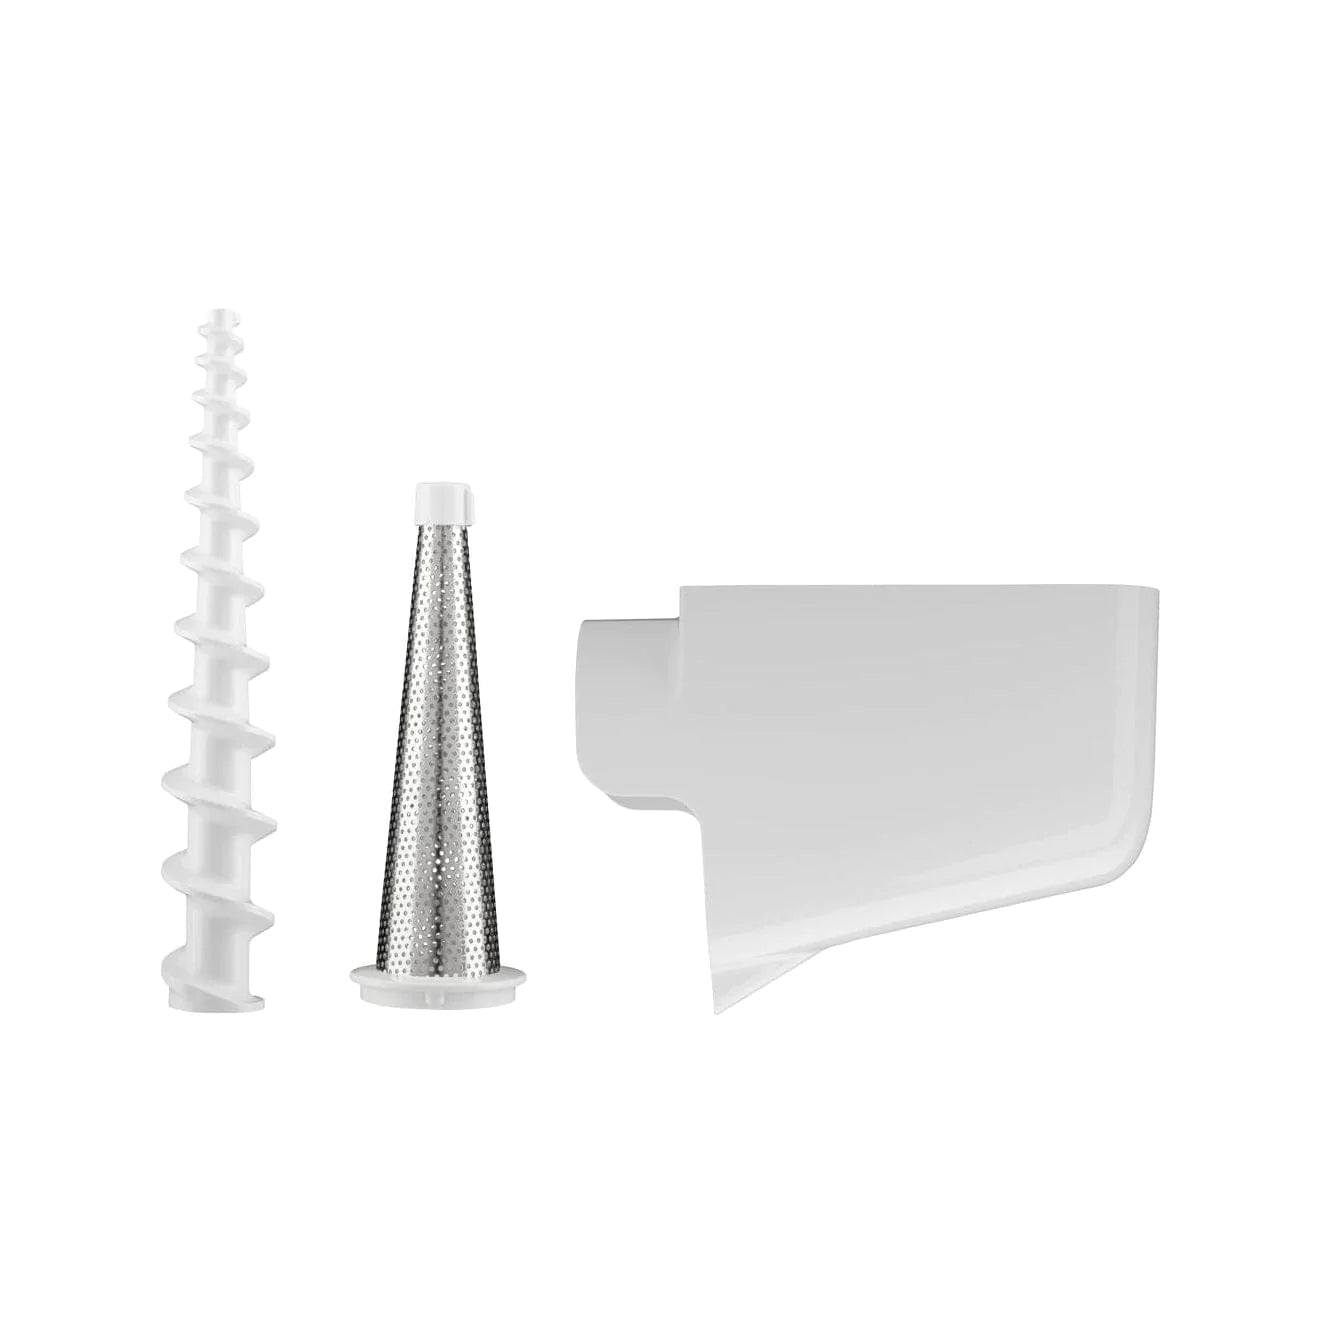 Steel Cone Grinder Attachment for KitchenAid Stand Mixers